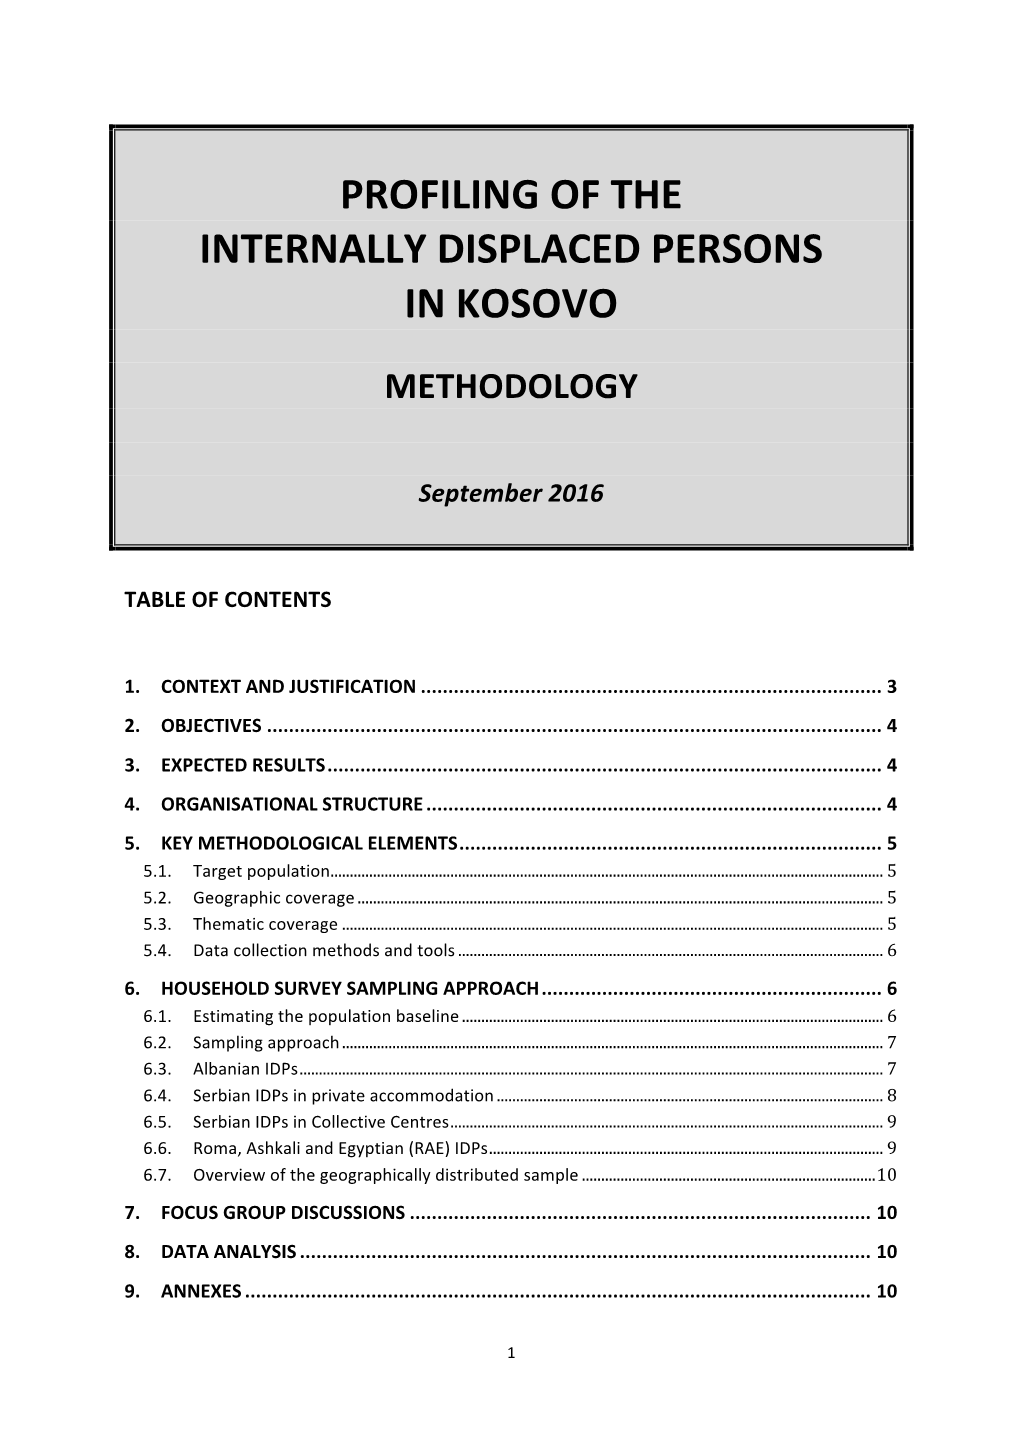 Profiling of the Internally Displaced Persons in Kosovo